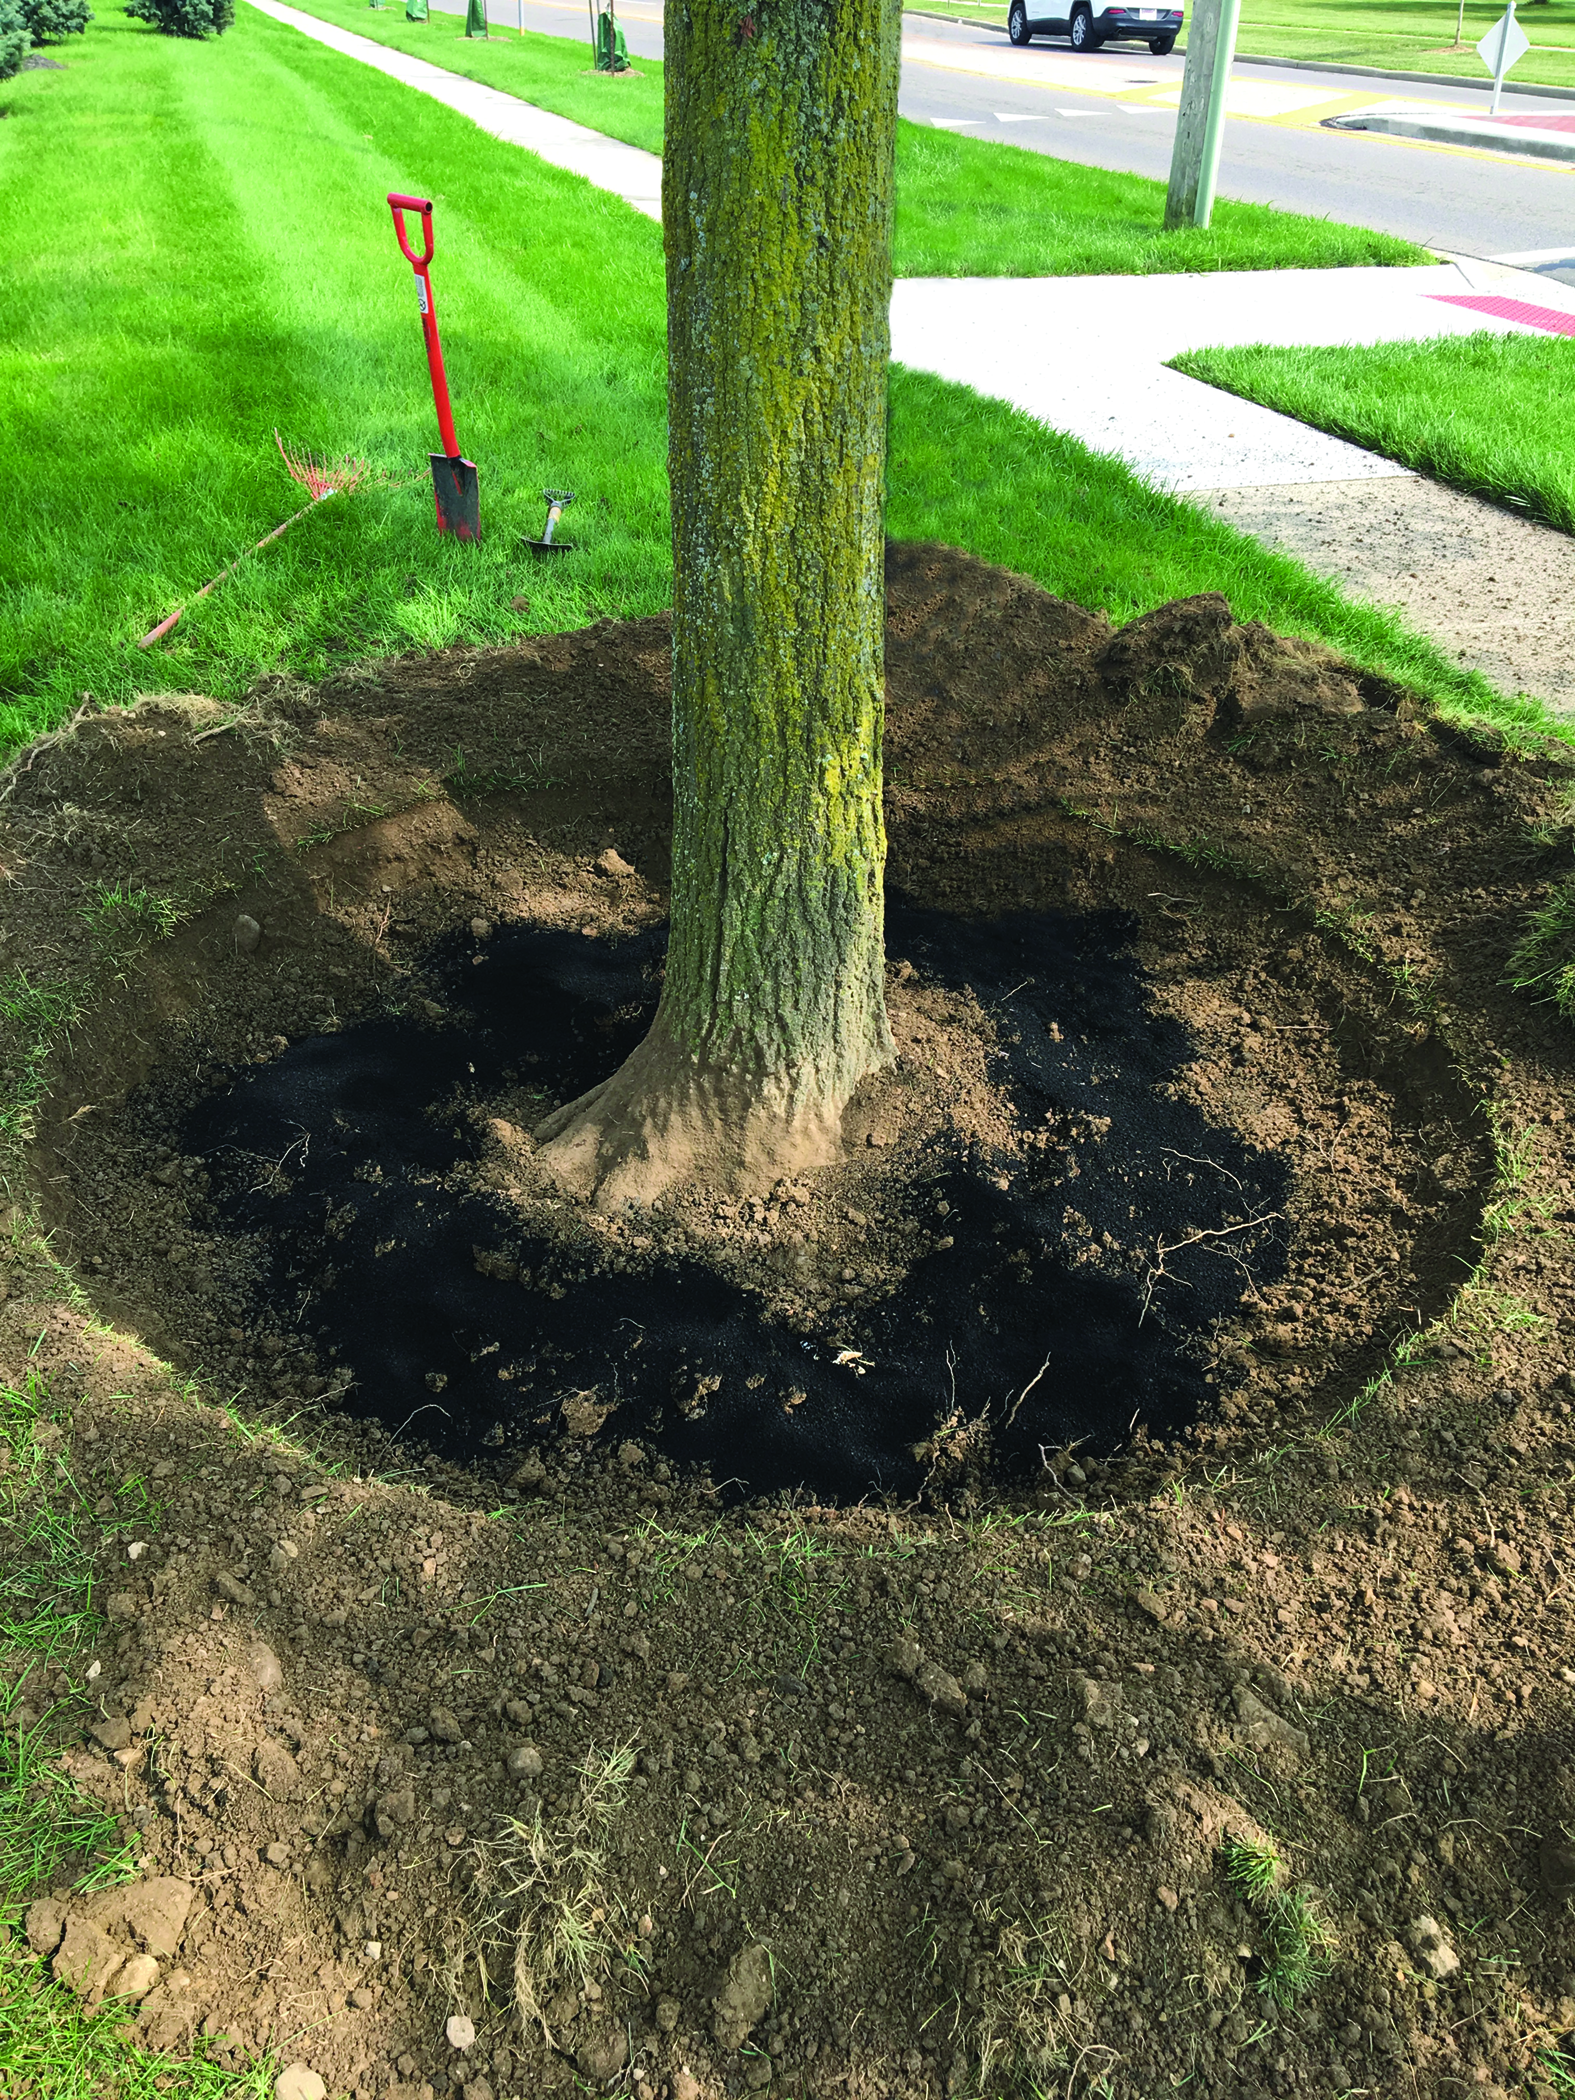 Staff at Joseph Tree Service LLC used an air excavation tool to decompact the soil around this red oak and lower the grade by 4 inches to establish proper root flare. They then added organic soil amendments. Photo courtesy of the author.